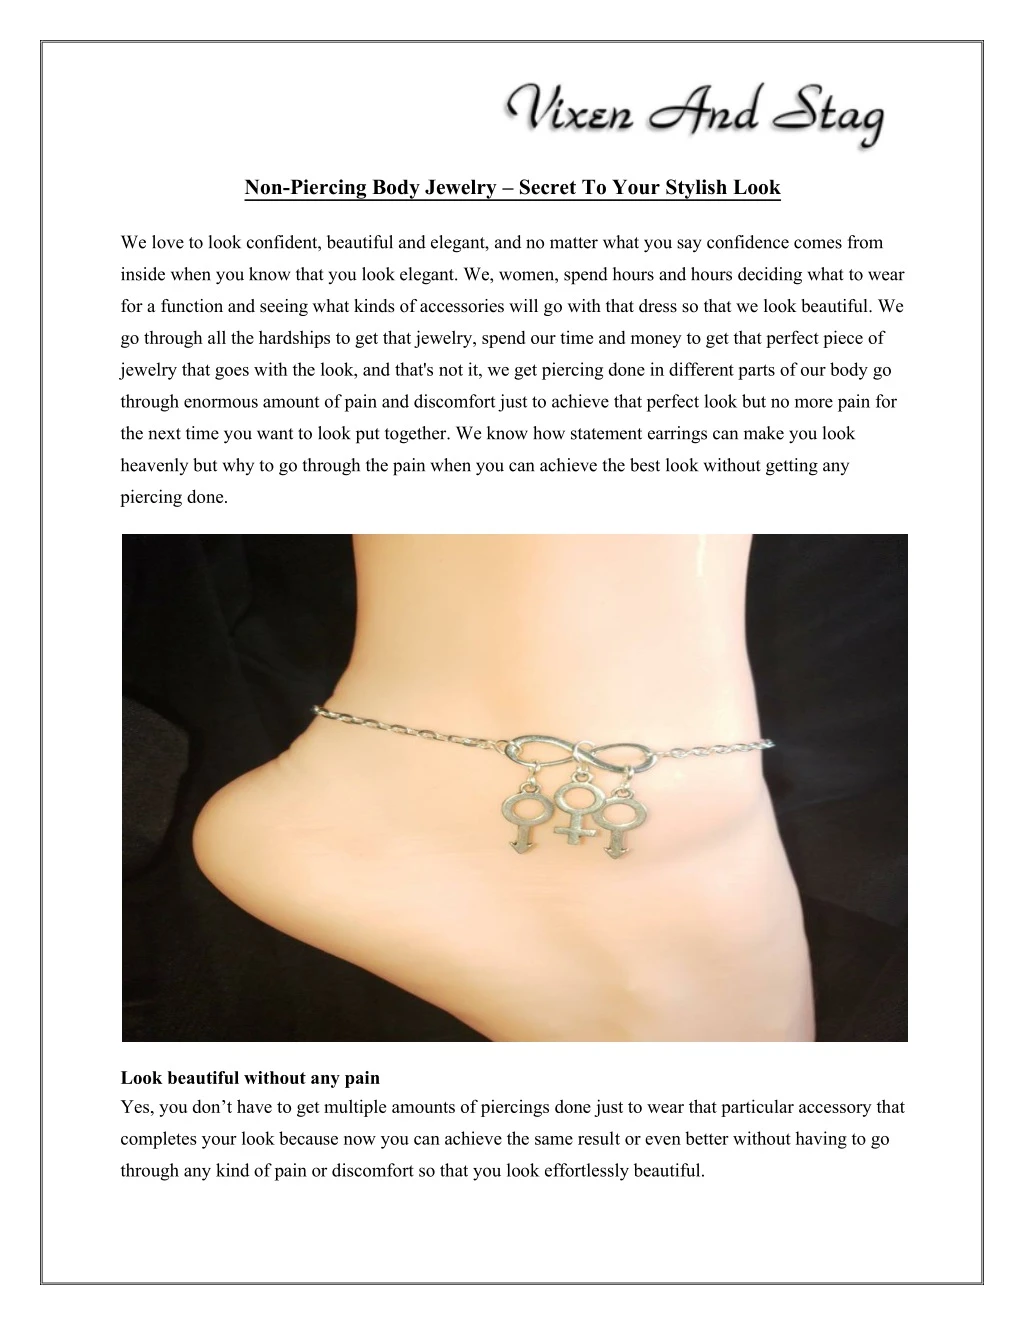 non piercing body jewelry secret to your stylish